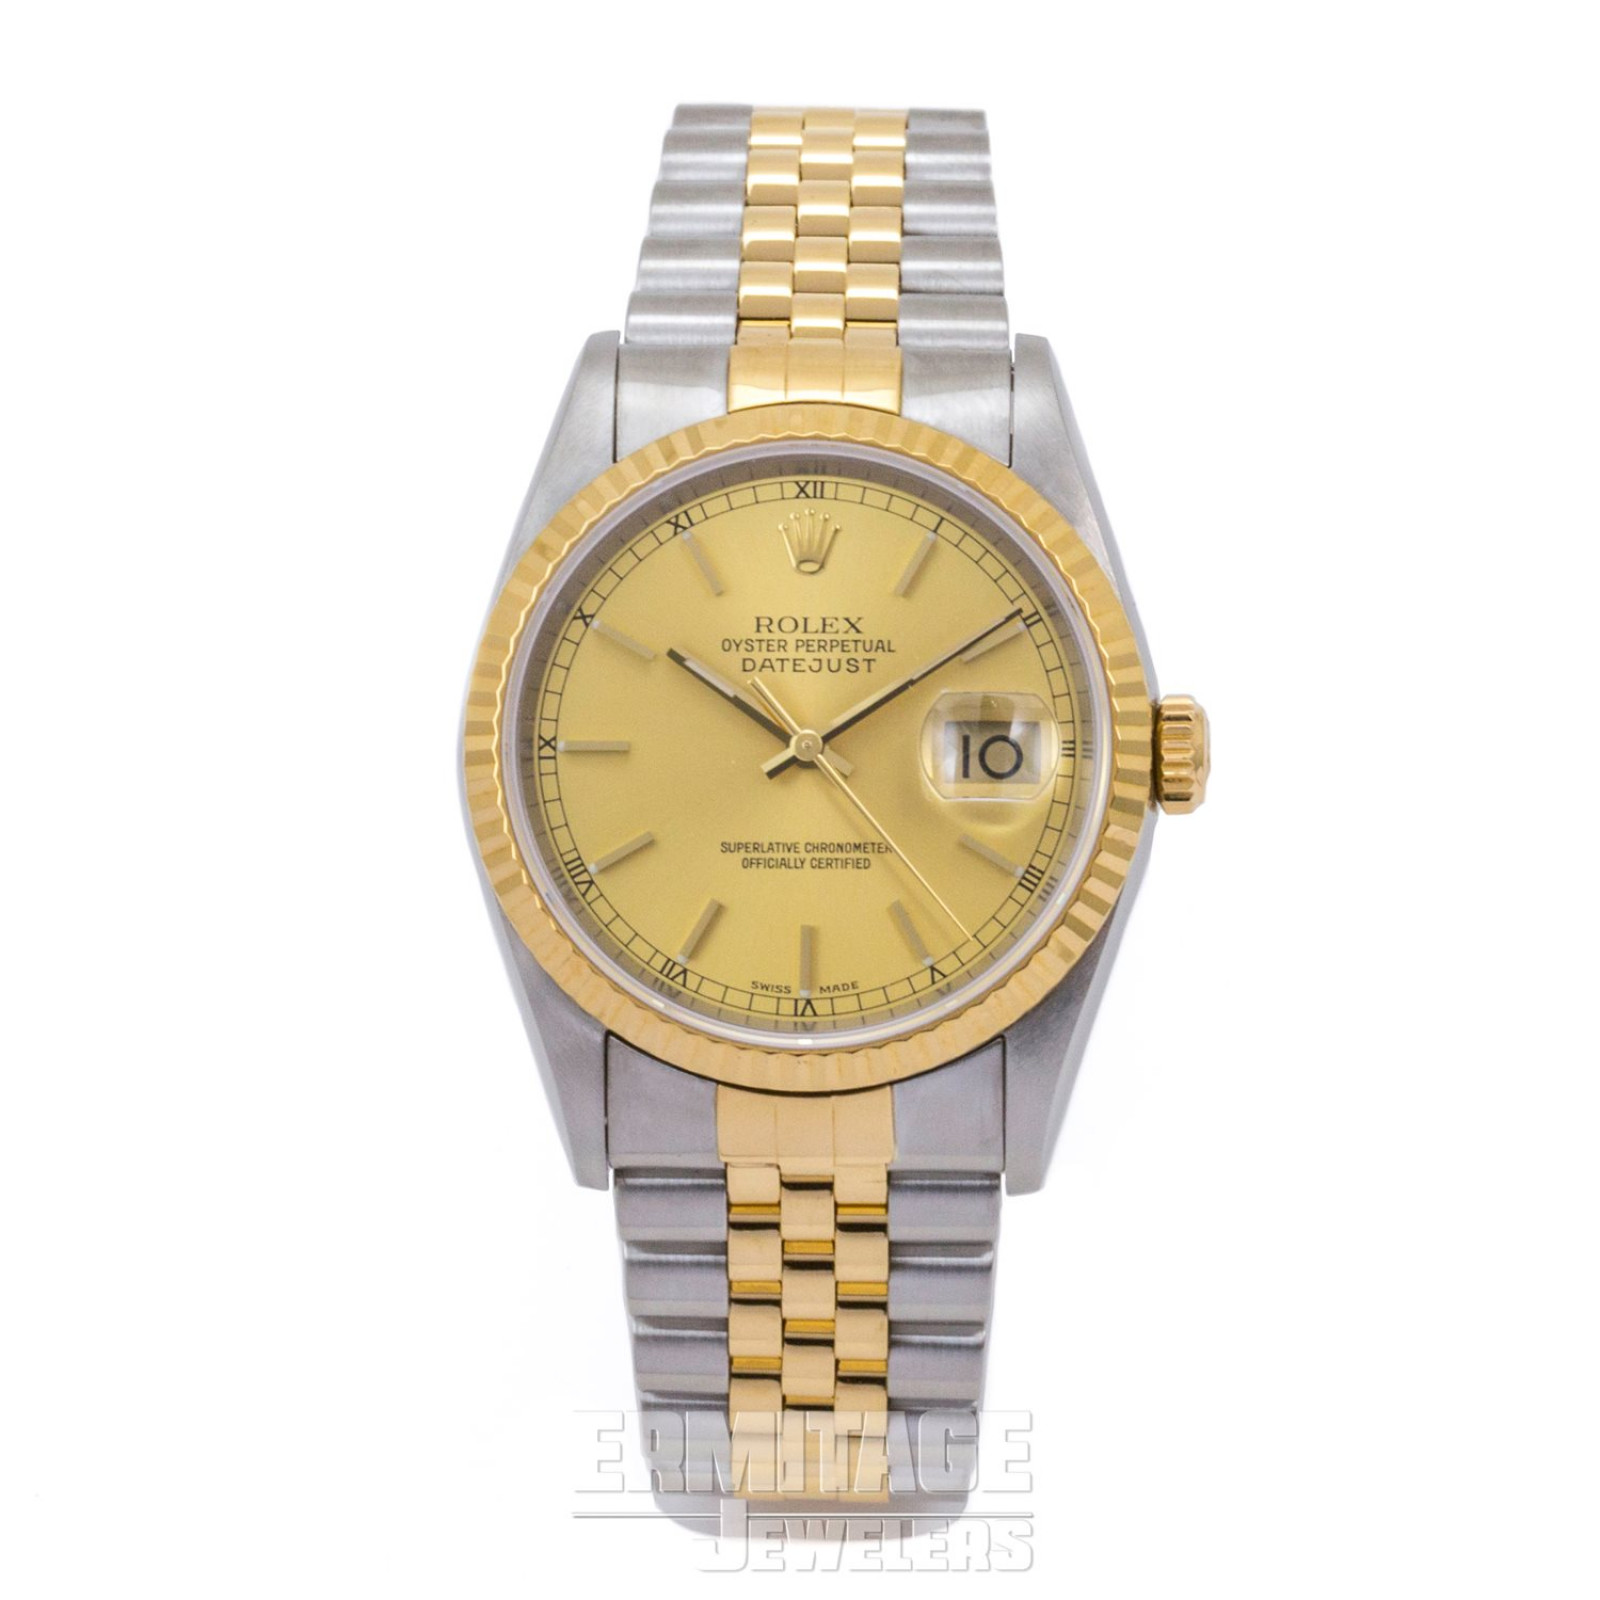 Rolex Datejust 16233 36 mm Champagne Dial